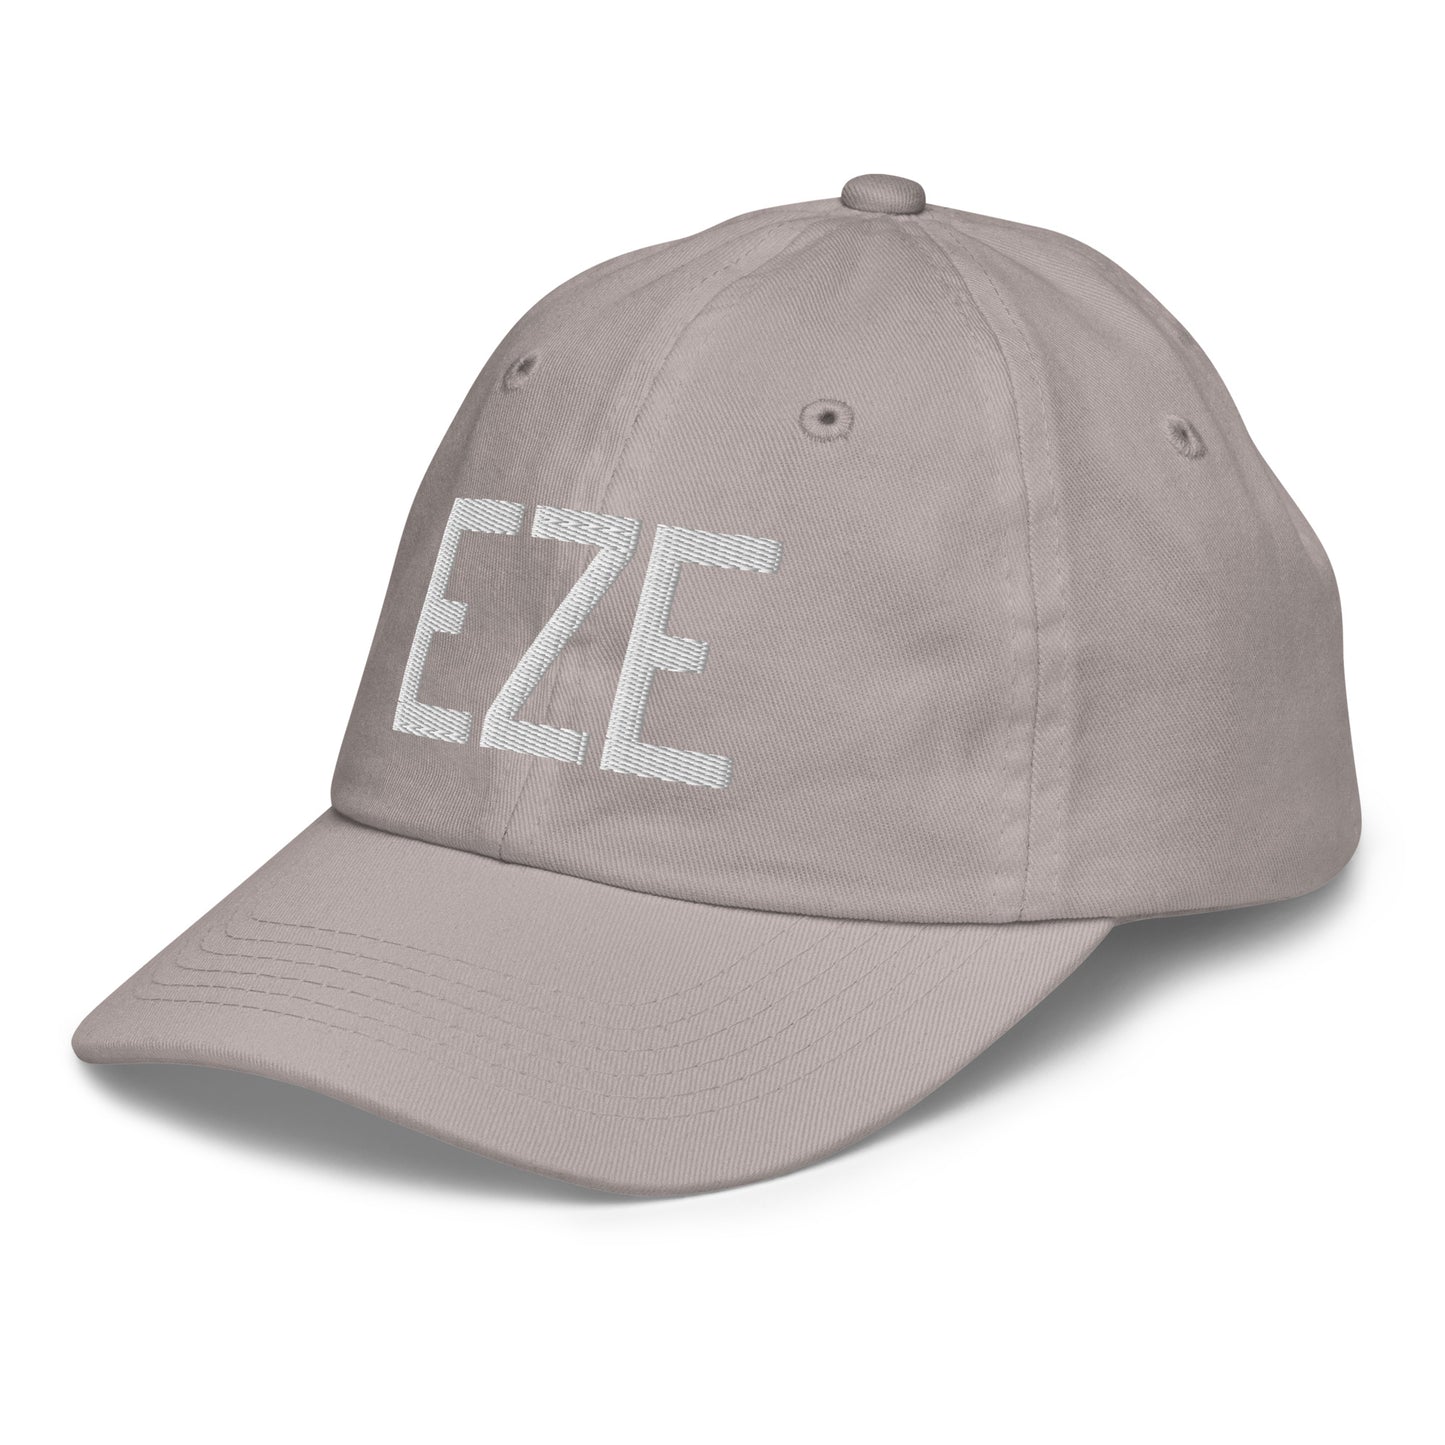 Airport Code Kid's Baseball Cap - White • EZE Buenos Aires • YHM Designs - Image 27